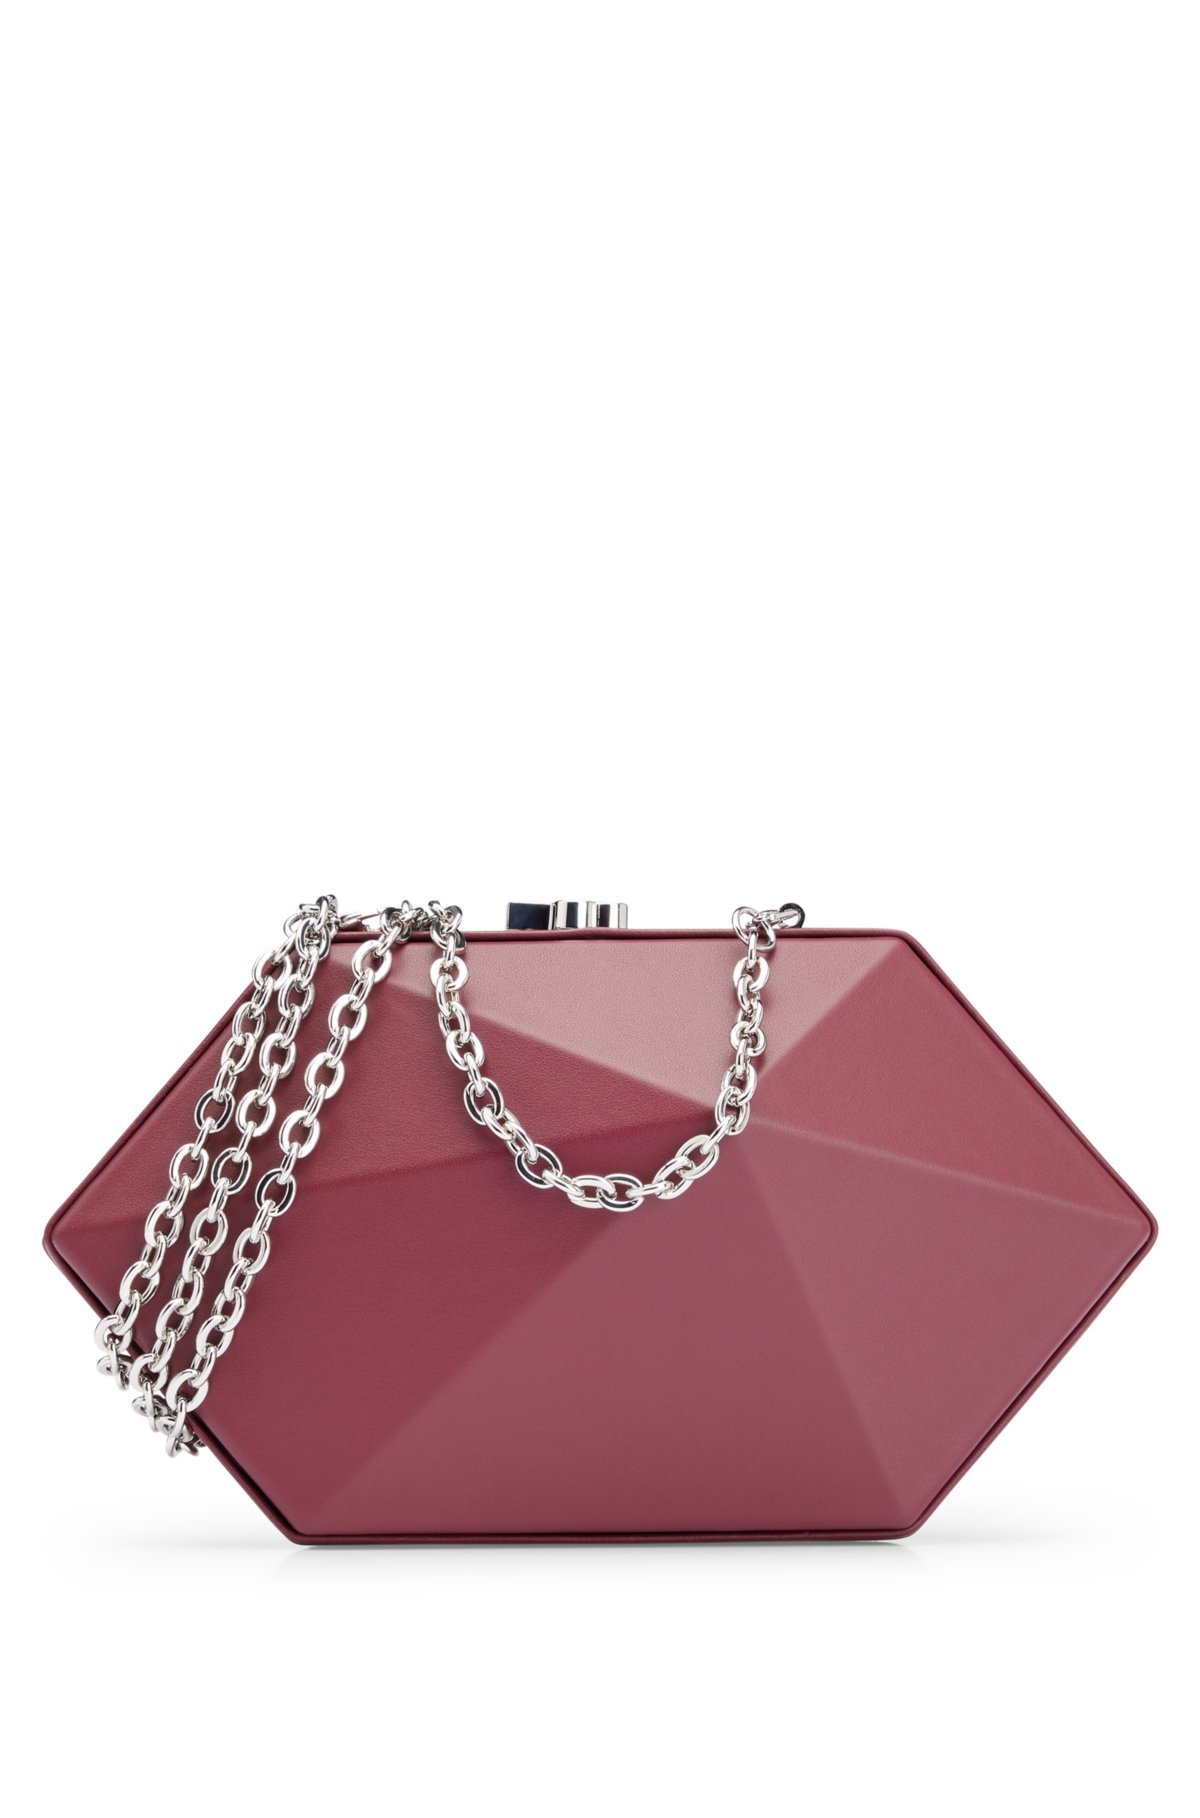 Grained-leather geometric clutch bag with chain strap